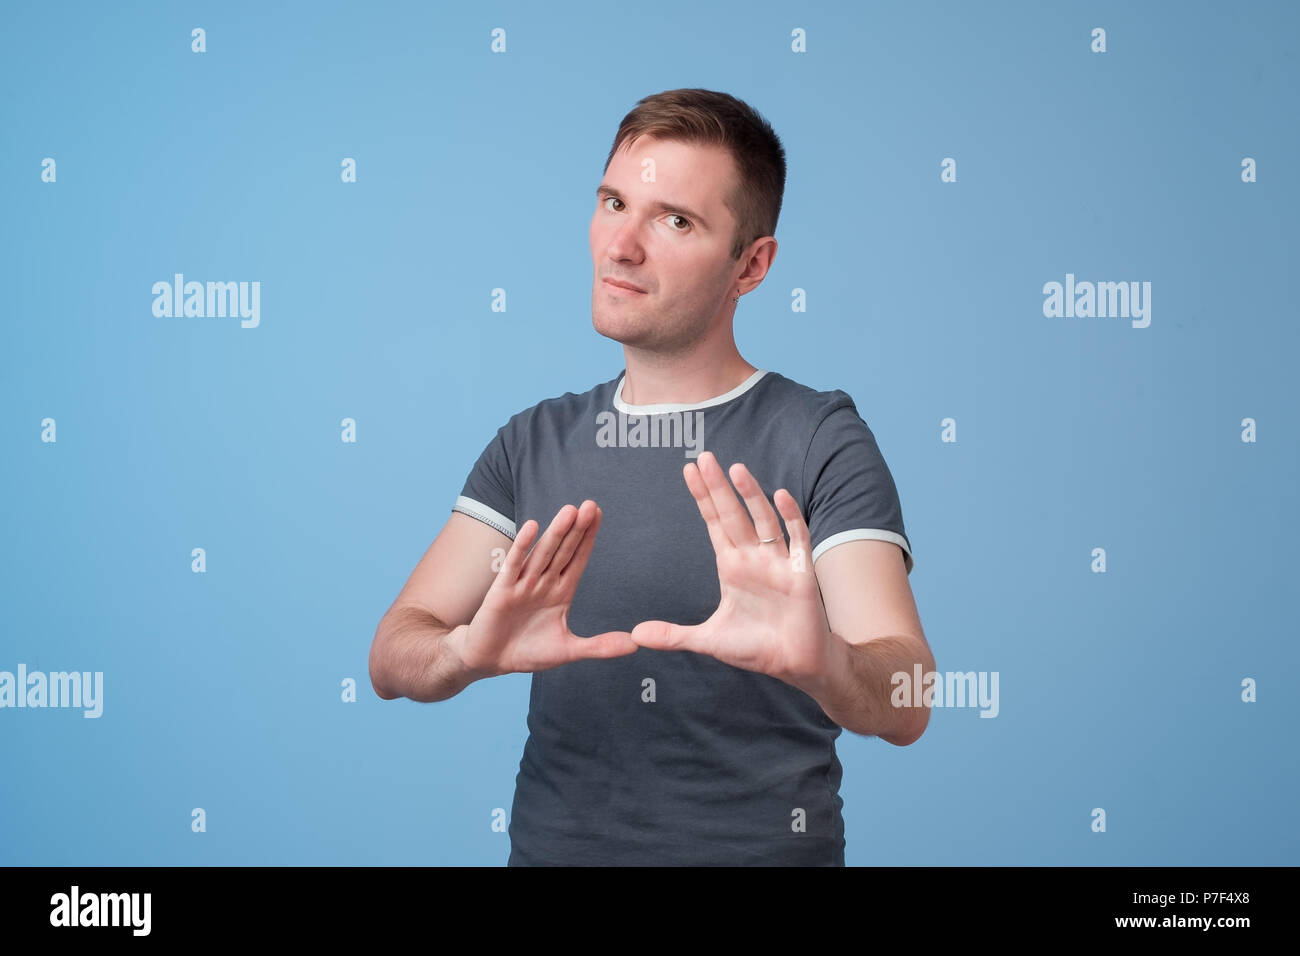 Portrait of european serious young man stretching hand towards camera with stop or hold gesture Stock Photo